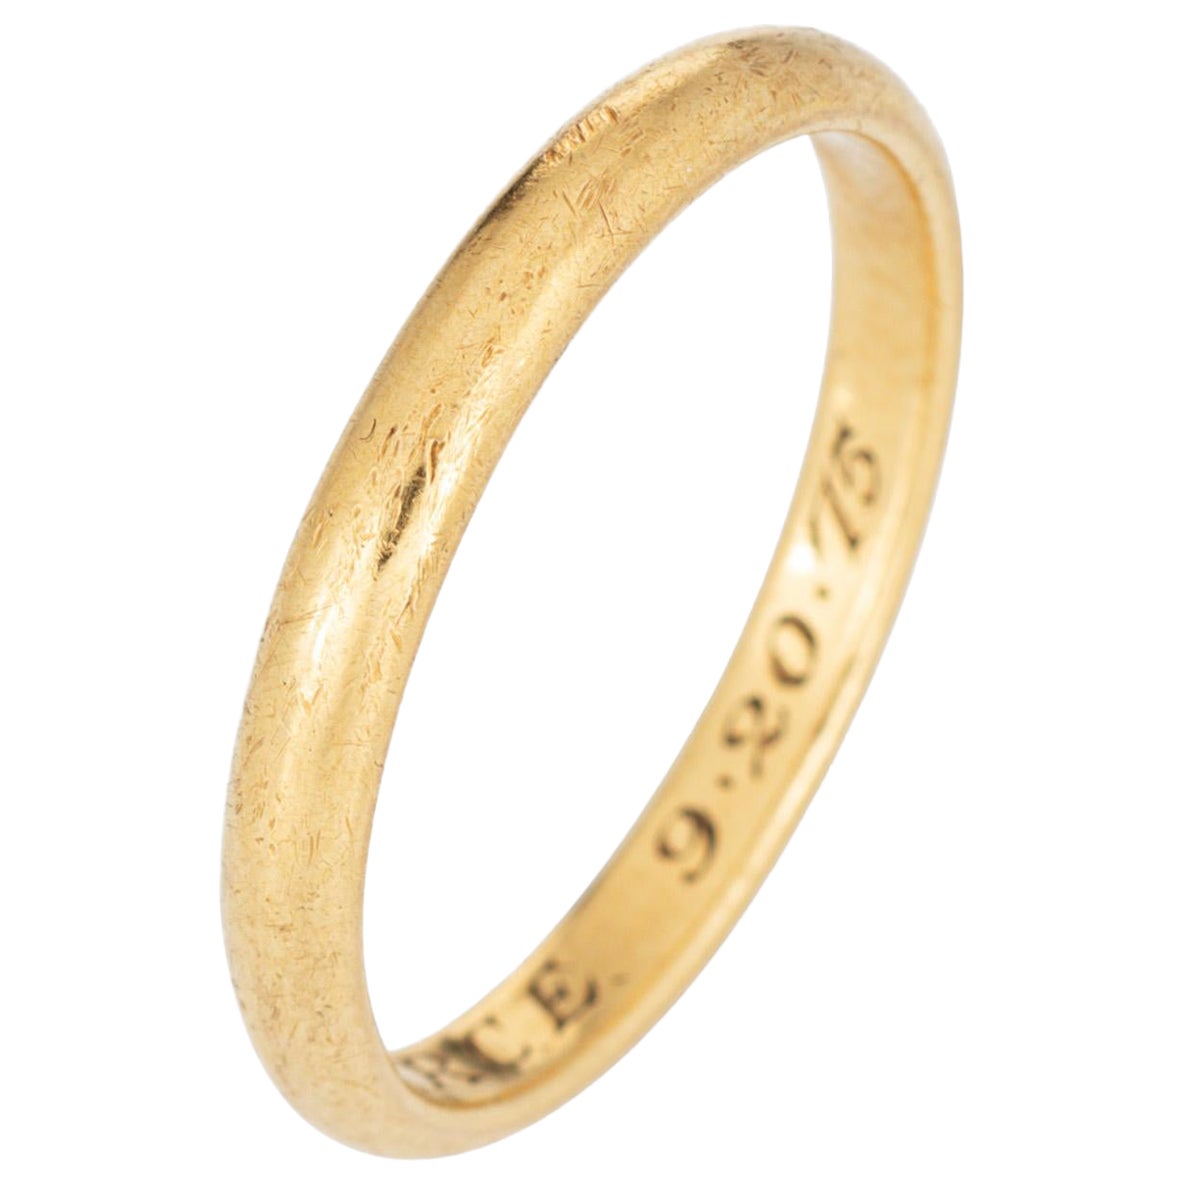 Vintage Cartier Wedding Ring Sz 10.25 3mm Band 18k Yellow Gold Signed Jewelry  For Sale